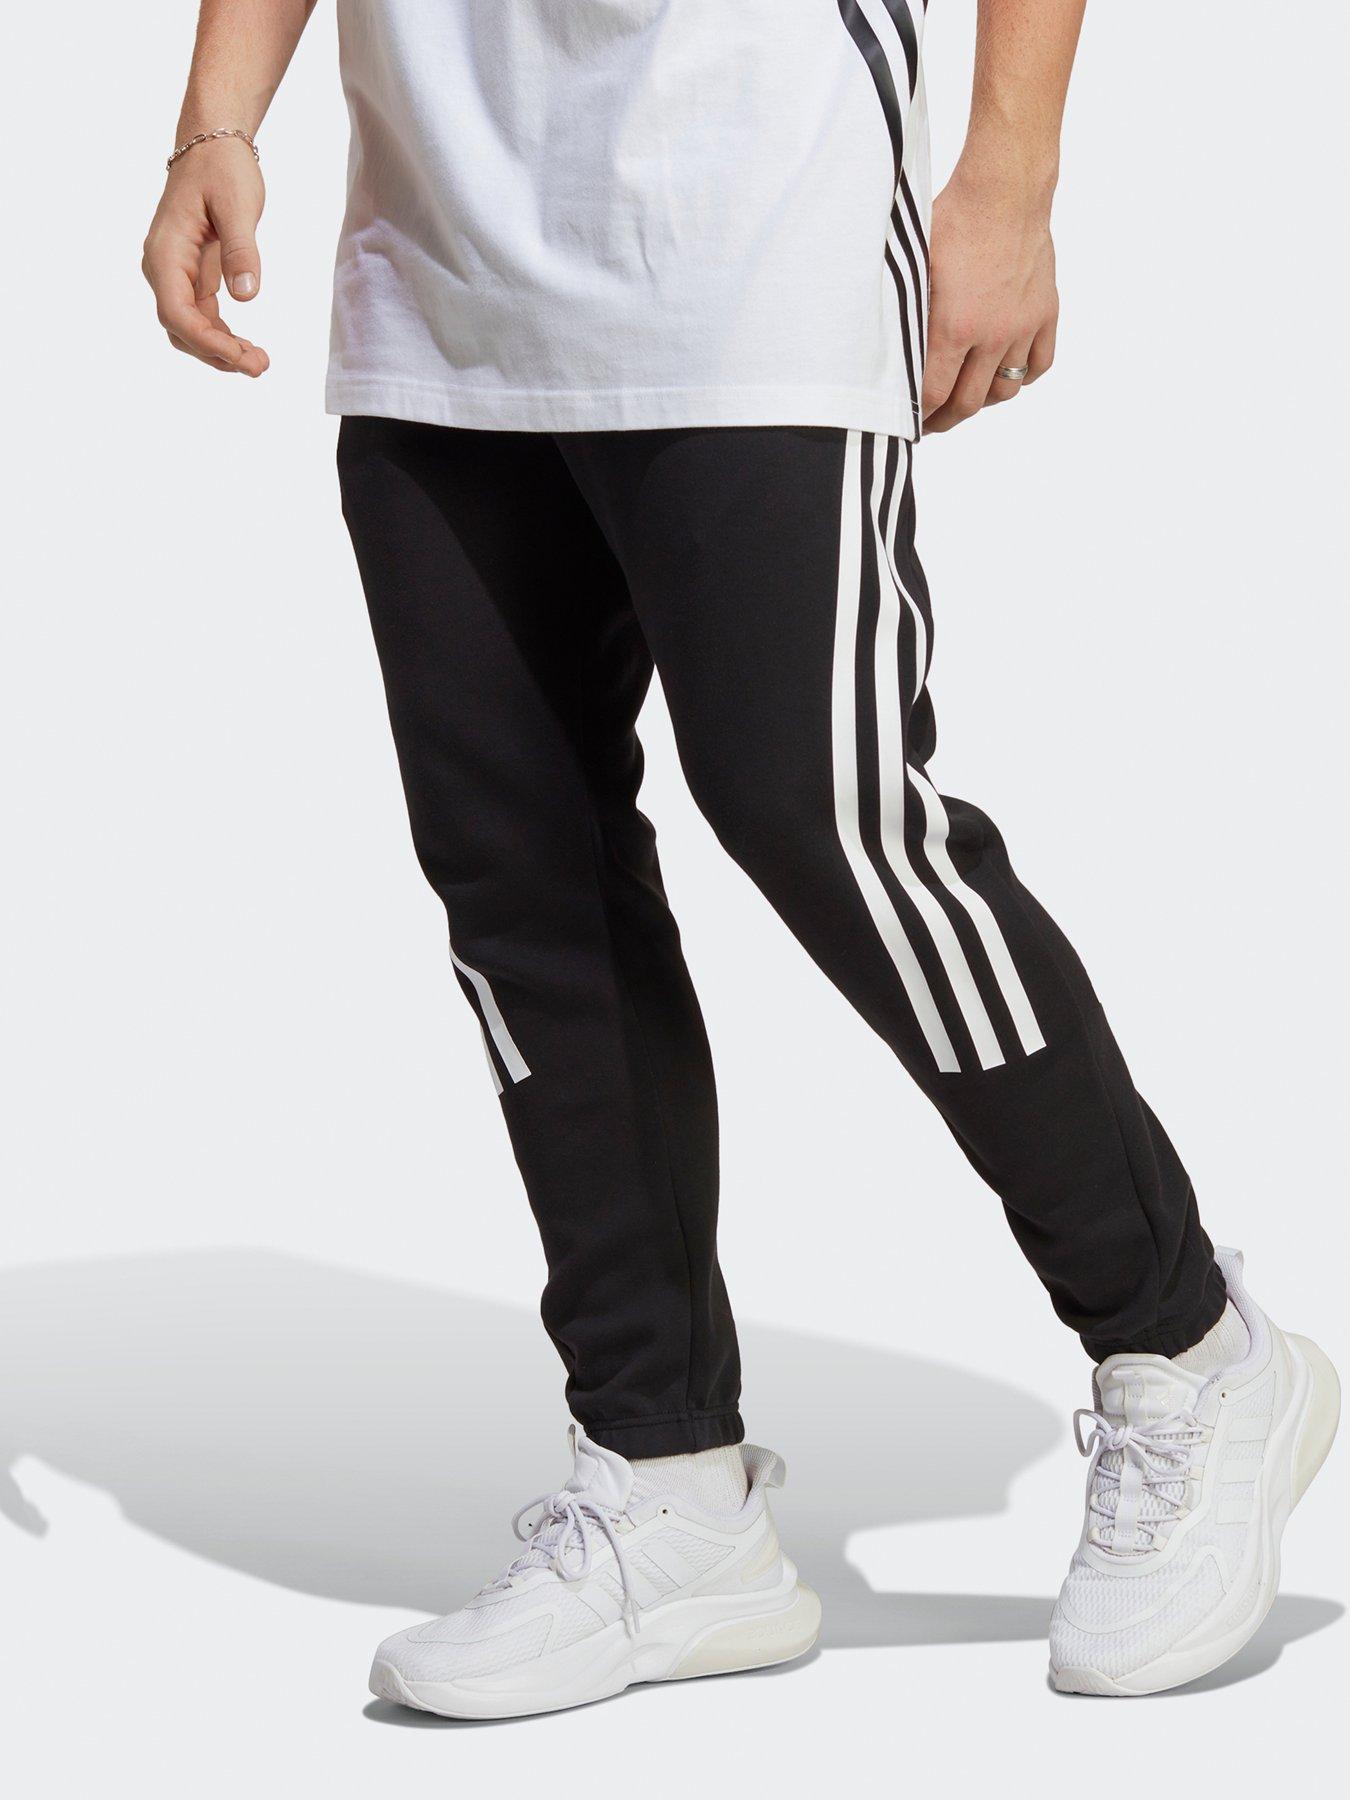 3XL | Adidas | Jogging bottoms Mens sports clothing | Sports | www.very.co.uk